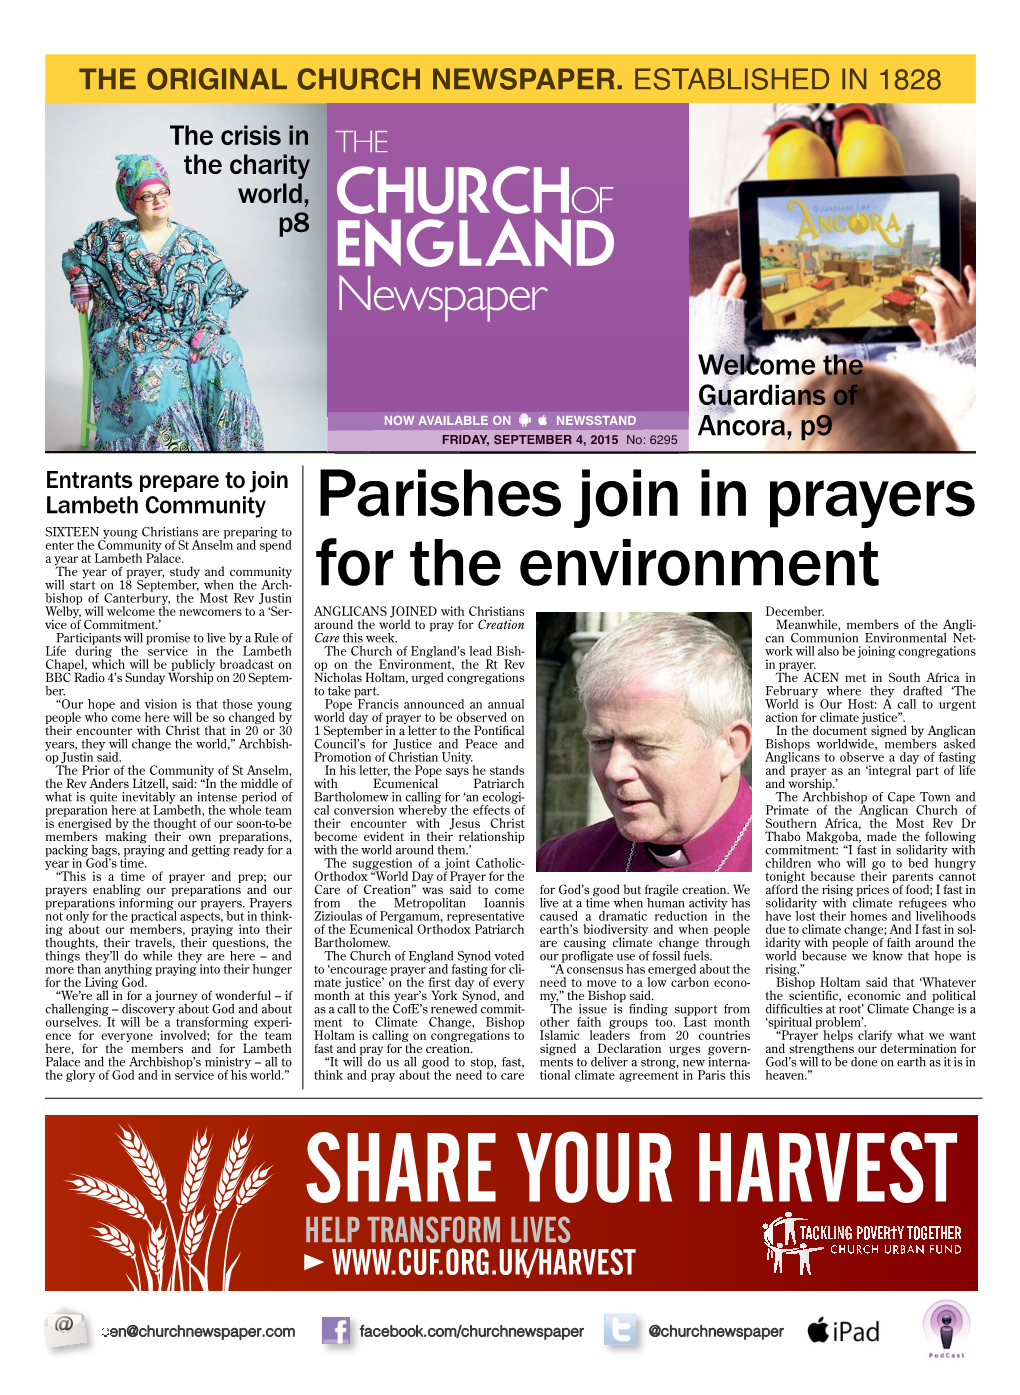 Parishes Join in Prayers for the Environment